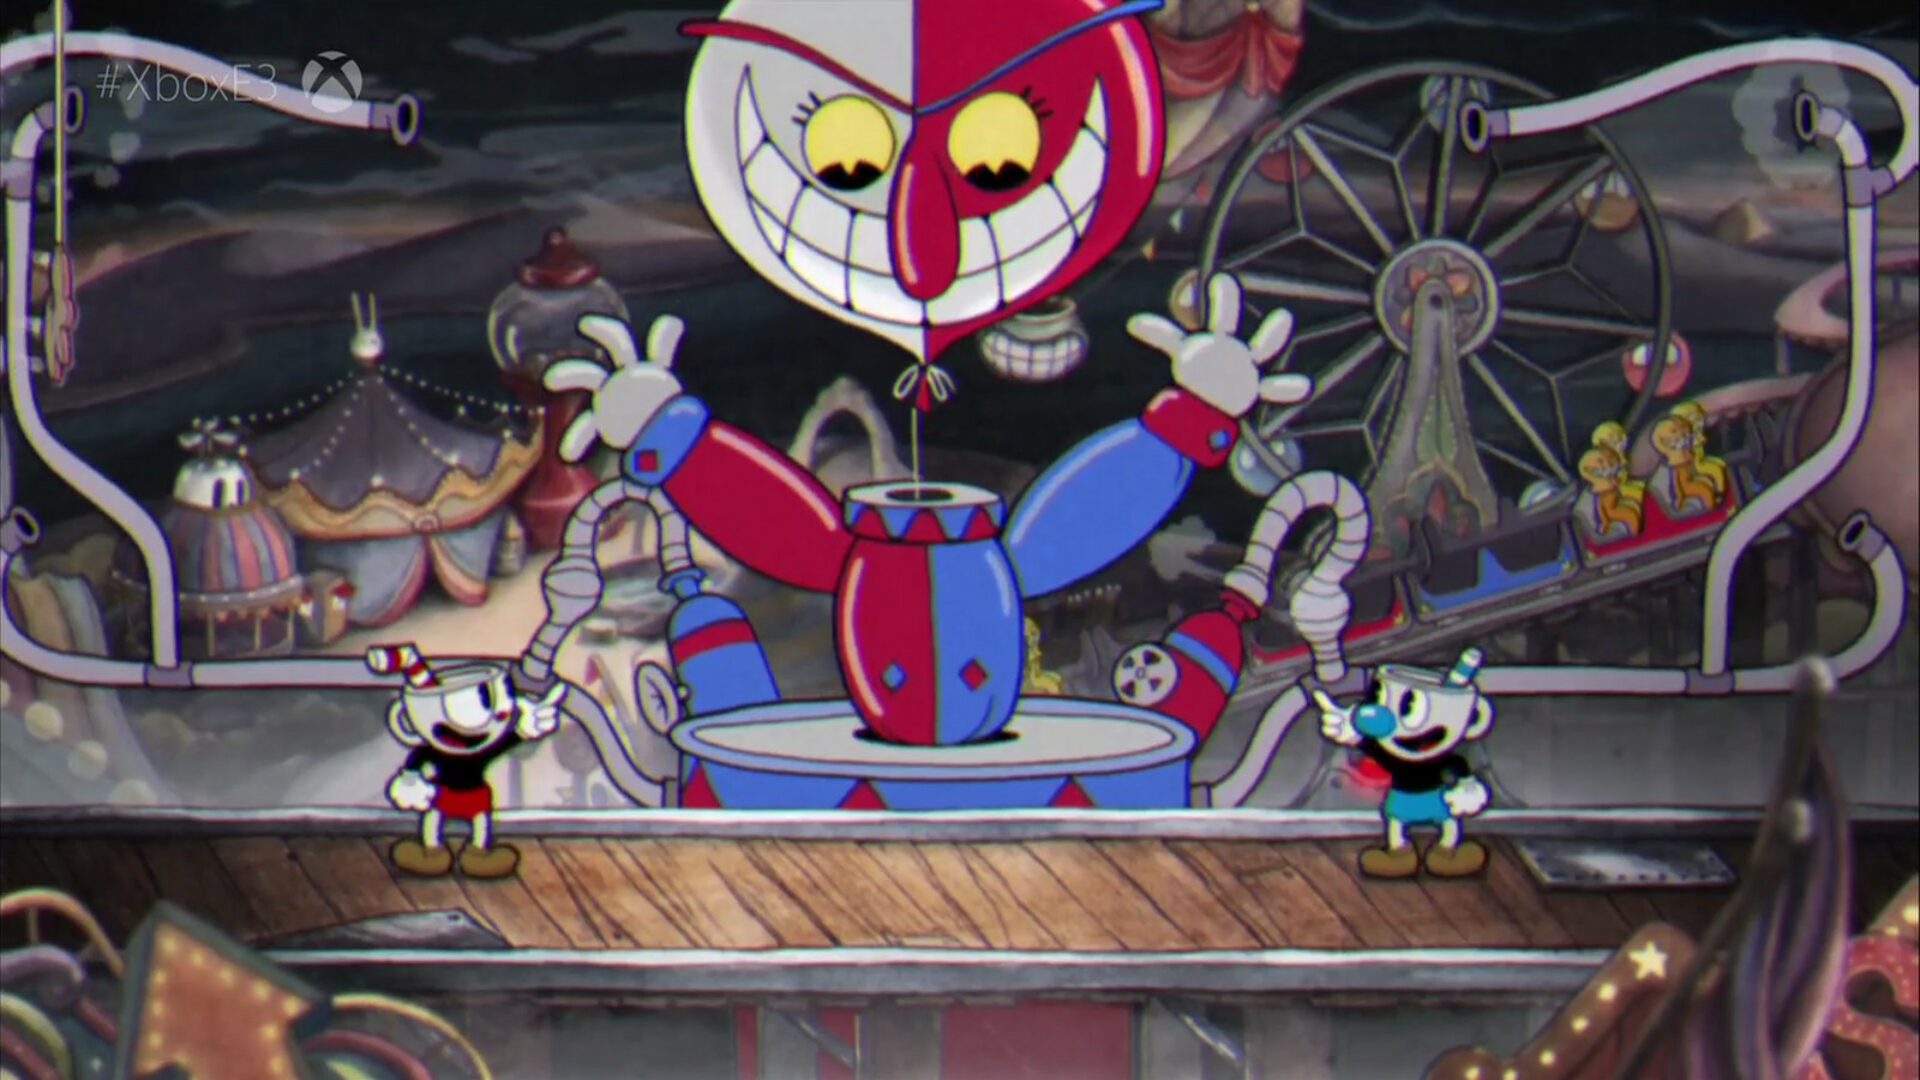 Cuphead for Xbox One and Windows 10 Gets Release Date